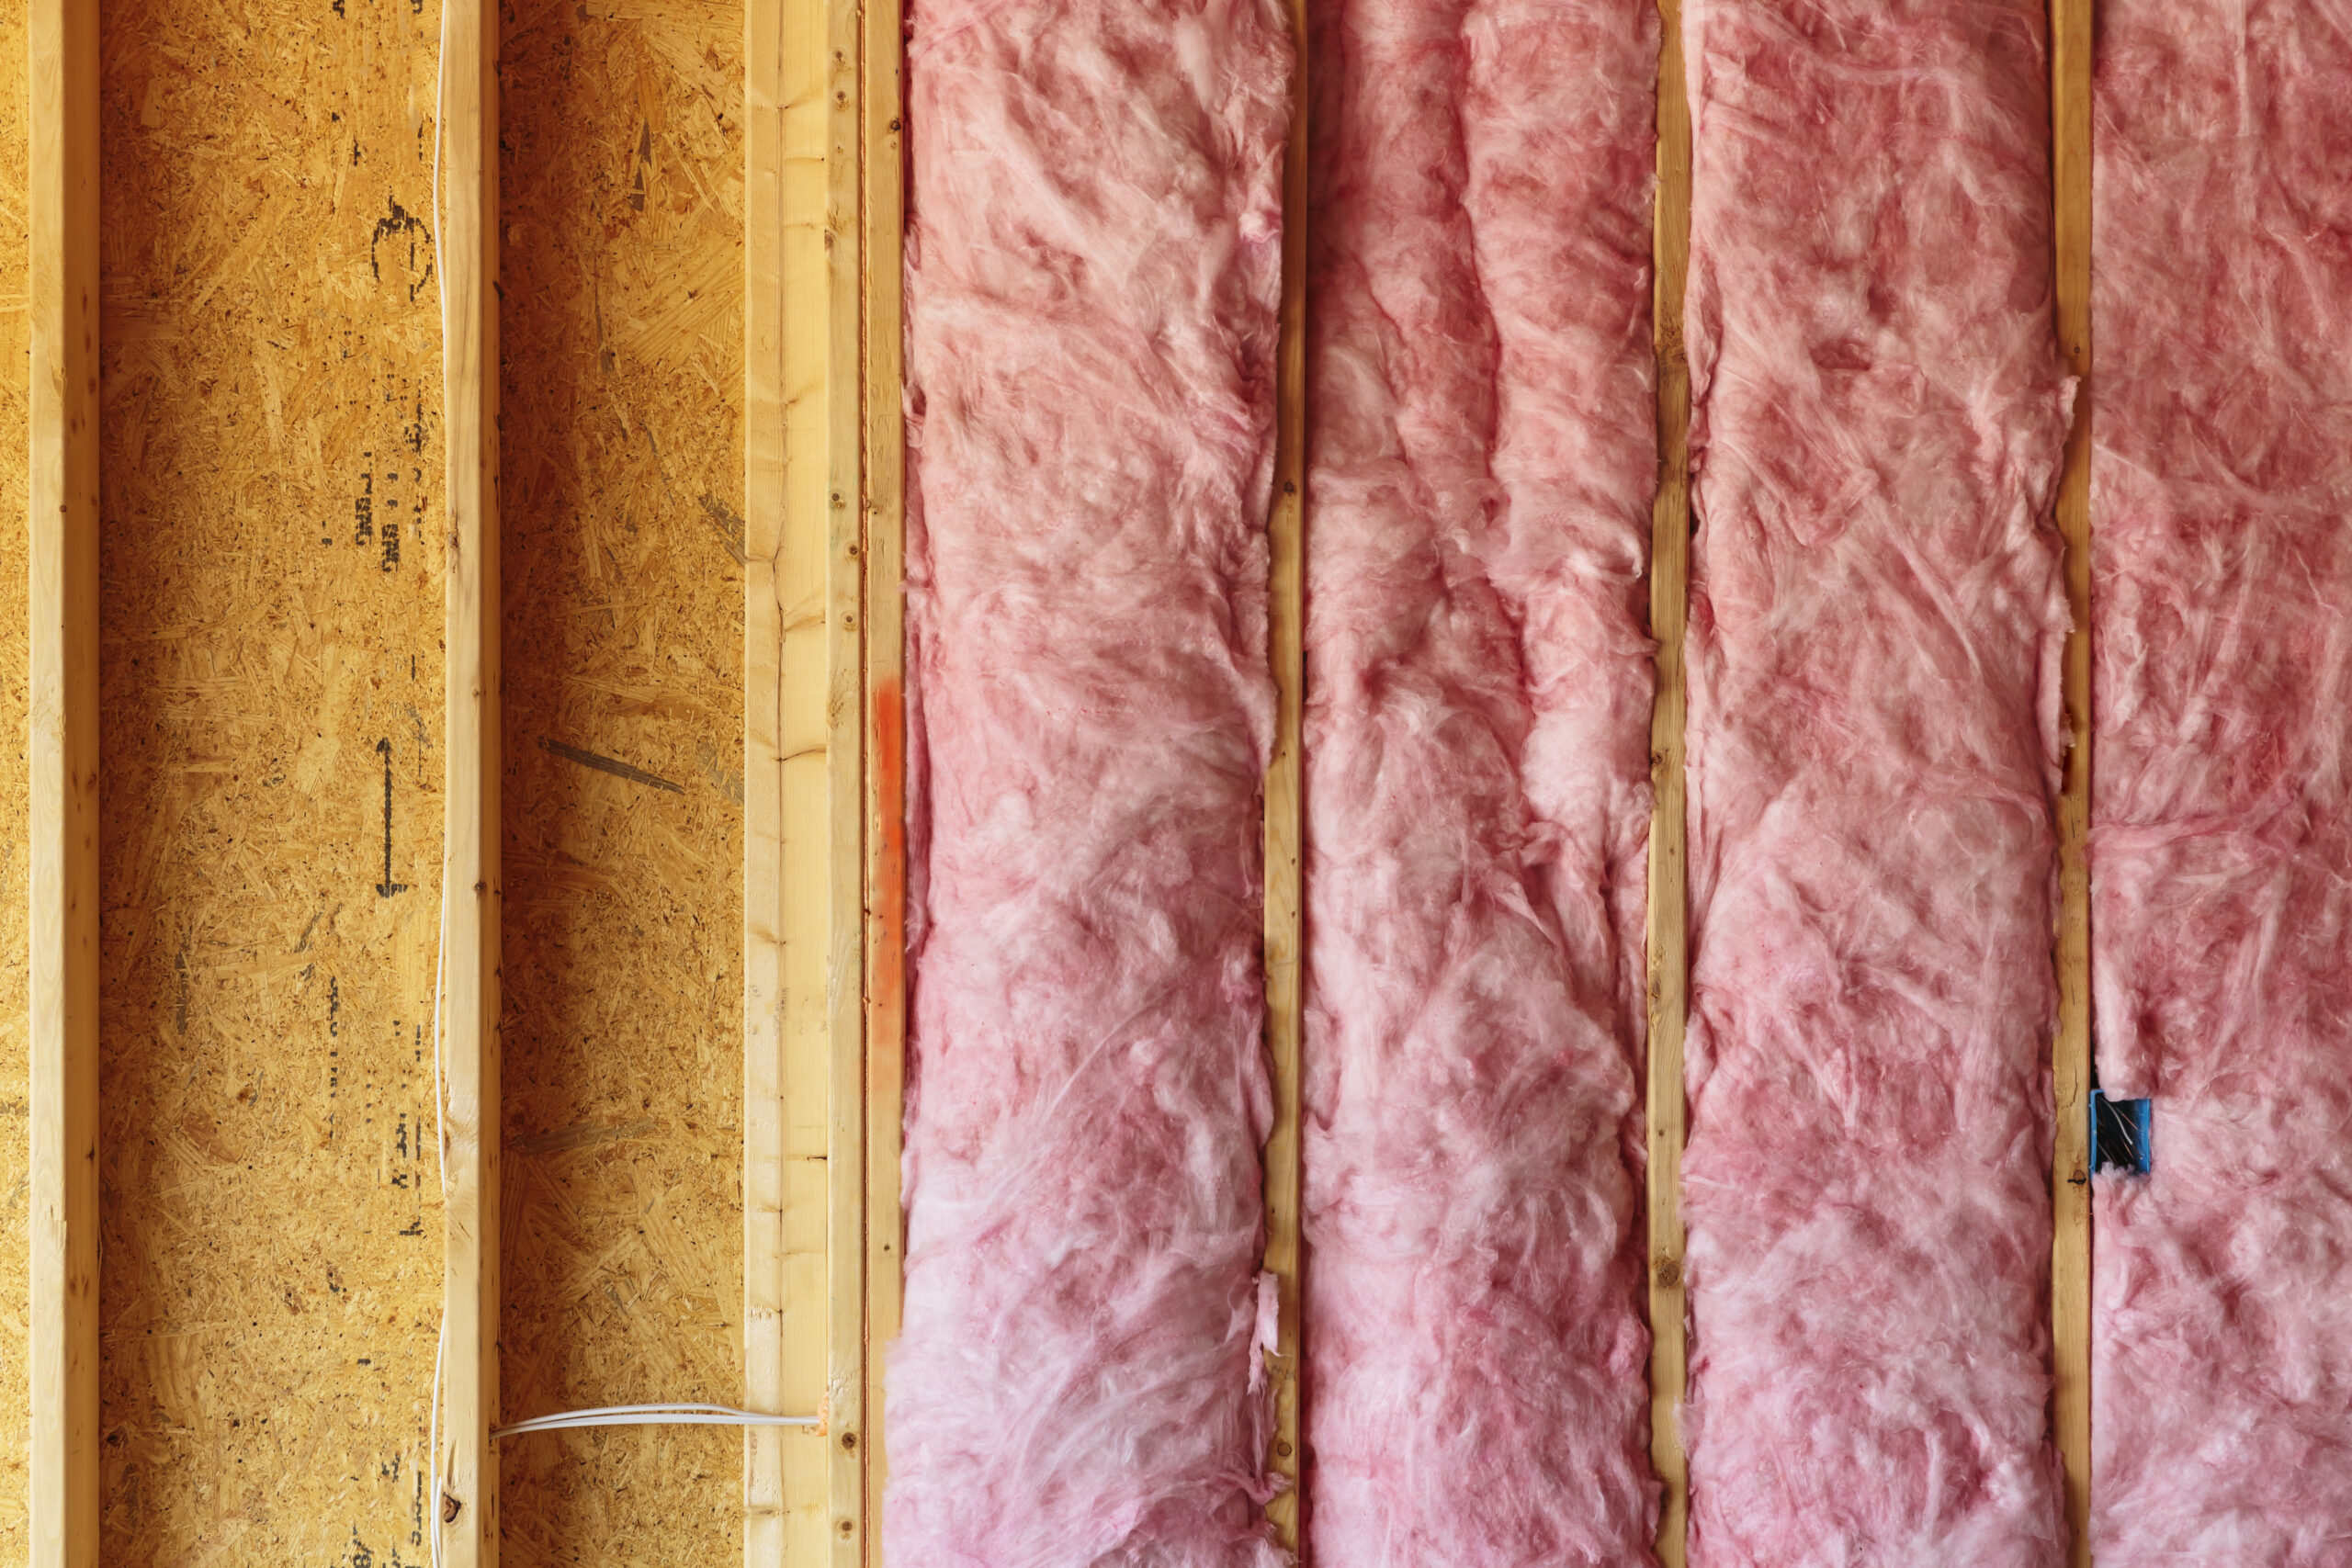 How to Tell If Insulation Has Asbestos